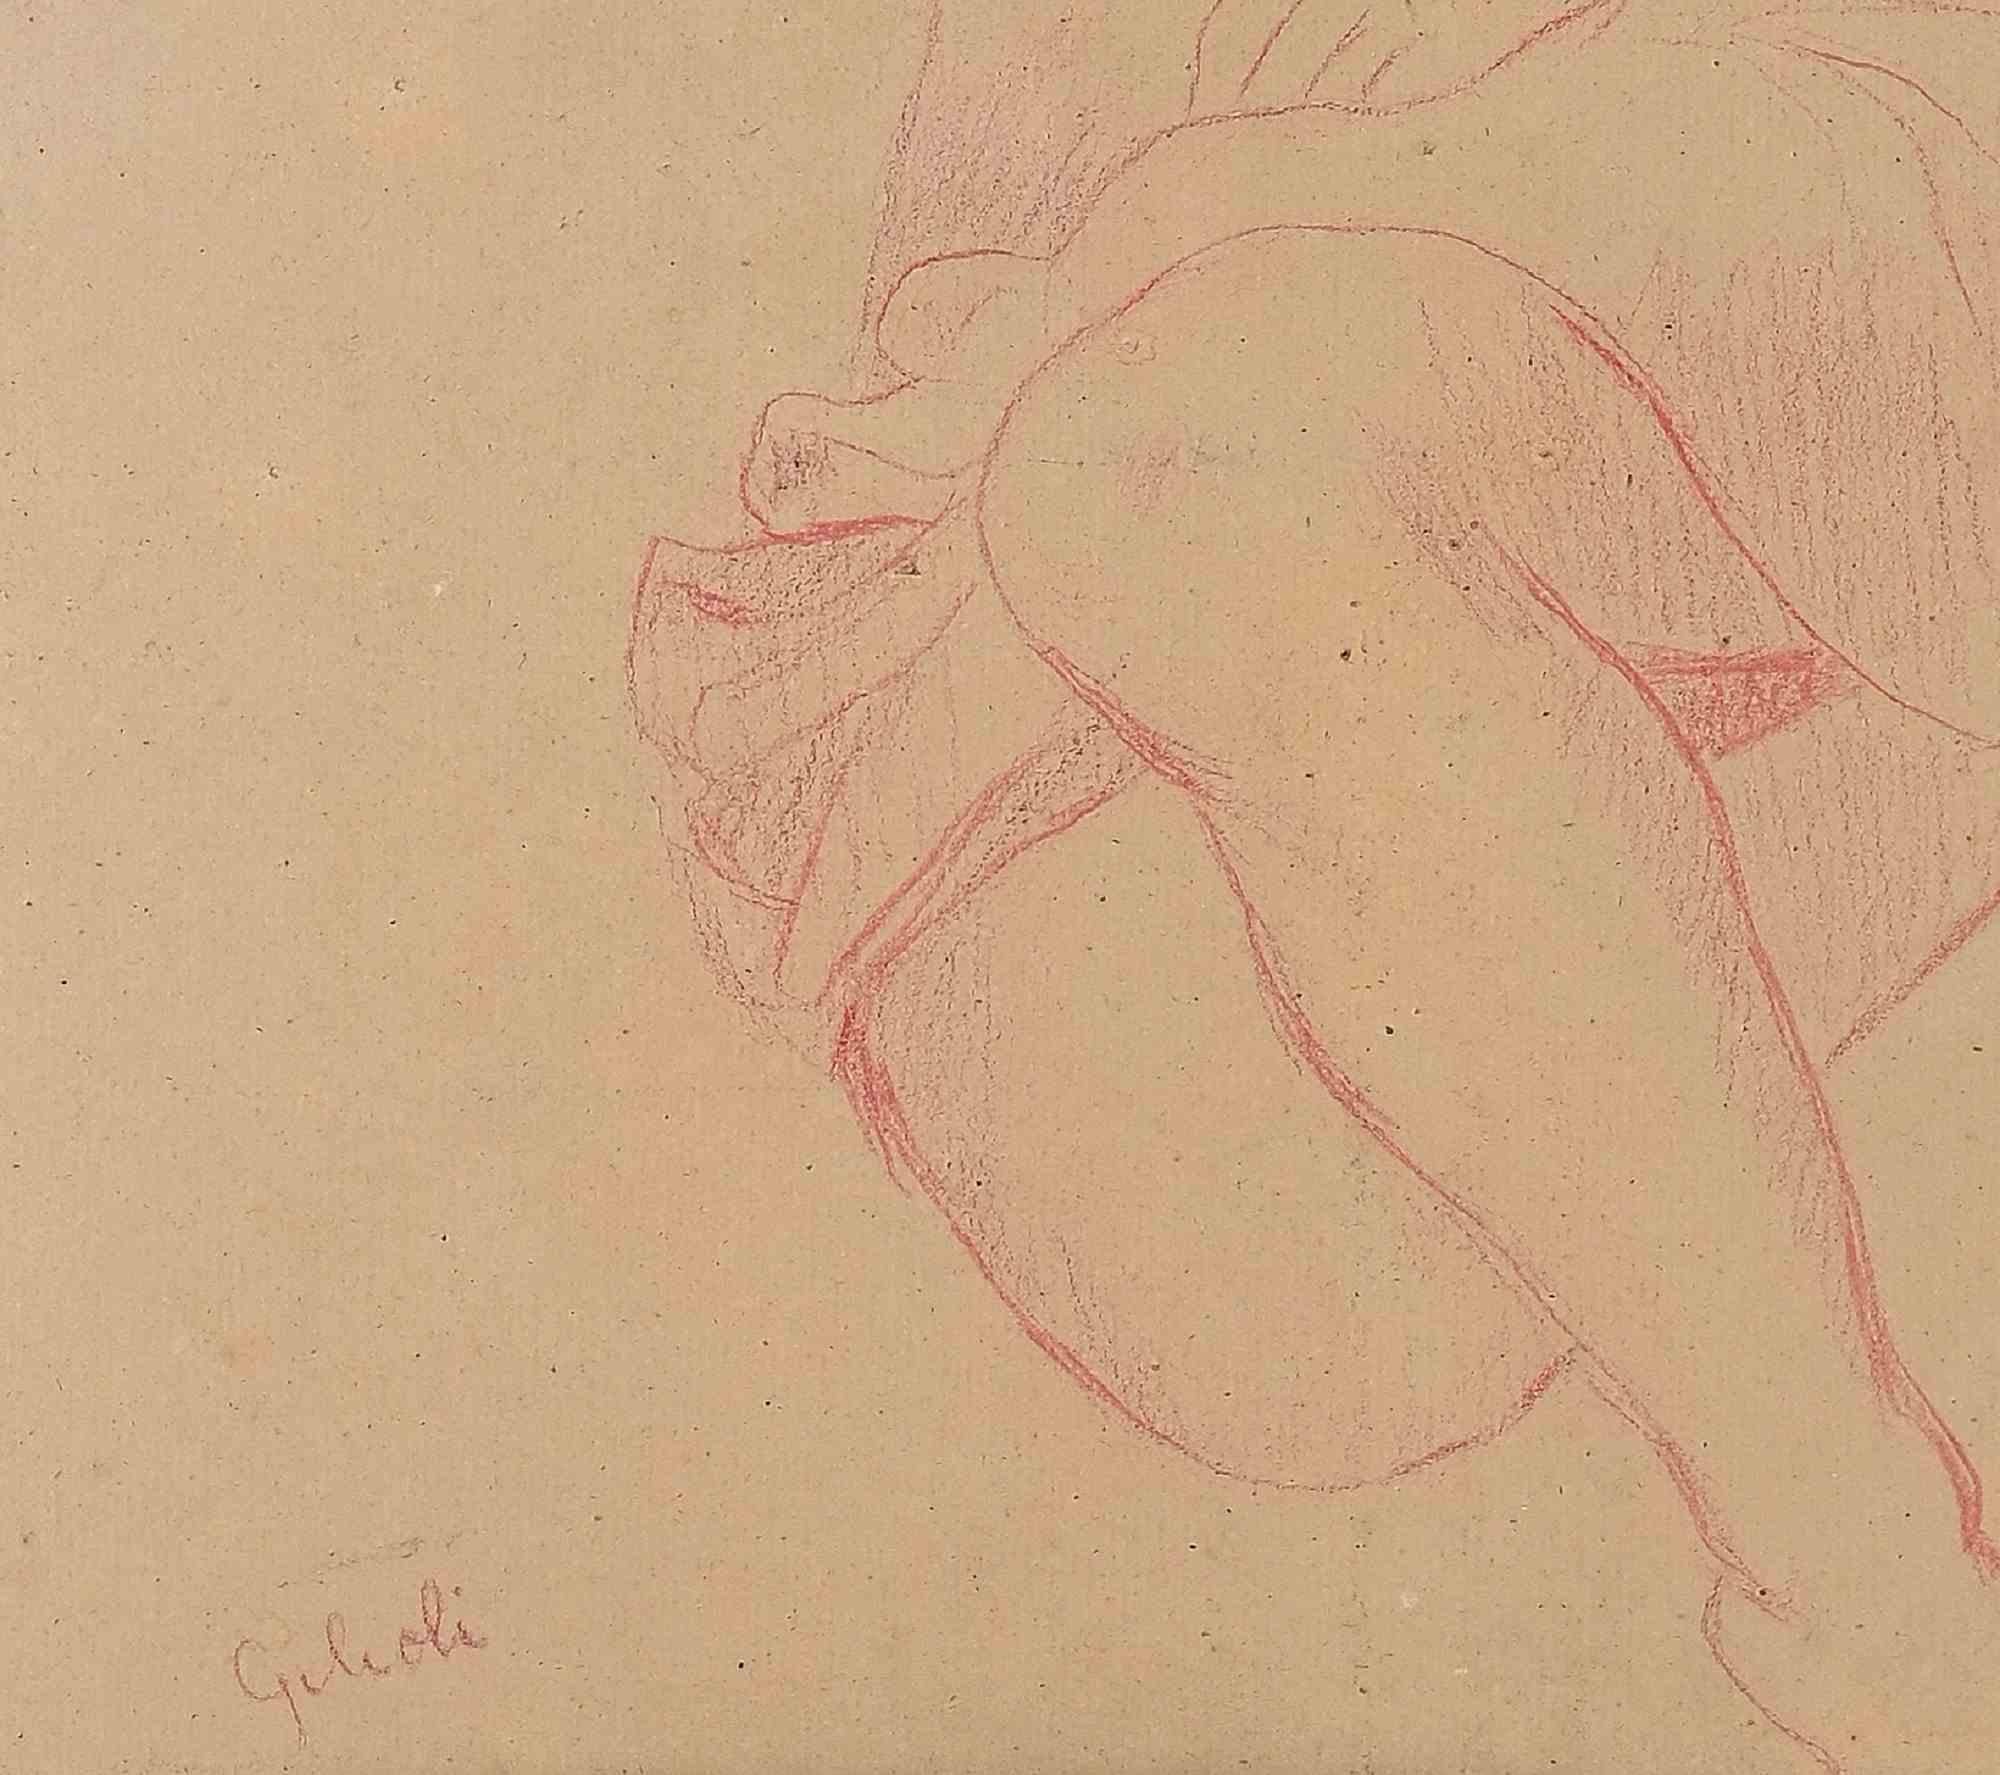 Nude of Woman - Drawing by Emile Gilioli - Mid 20th Century - Contemporary Art by Émile Gilioli